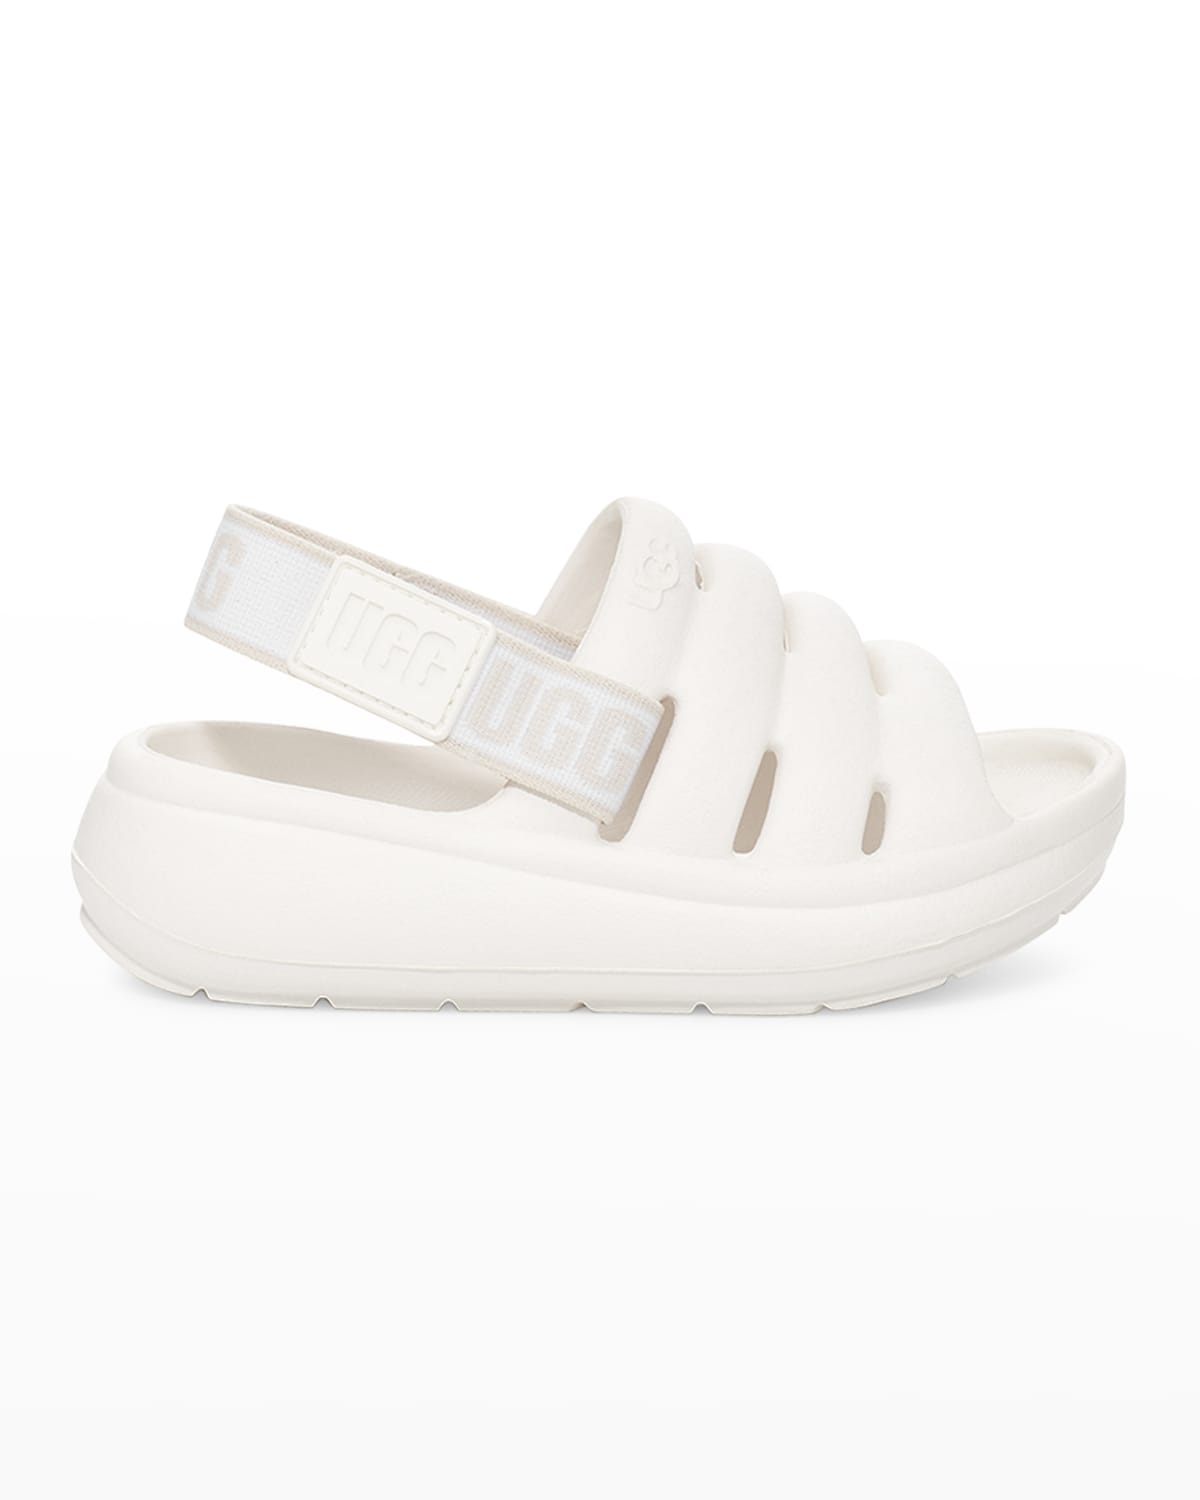 Kid's Sport Yeah Caged EVA Sandals, Baby/Toddlers